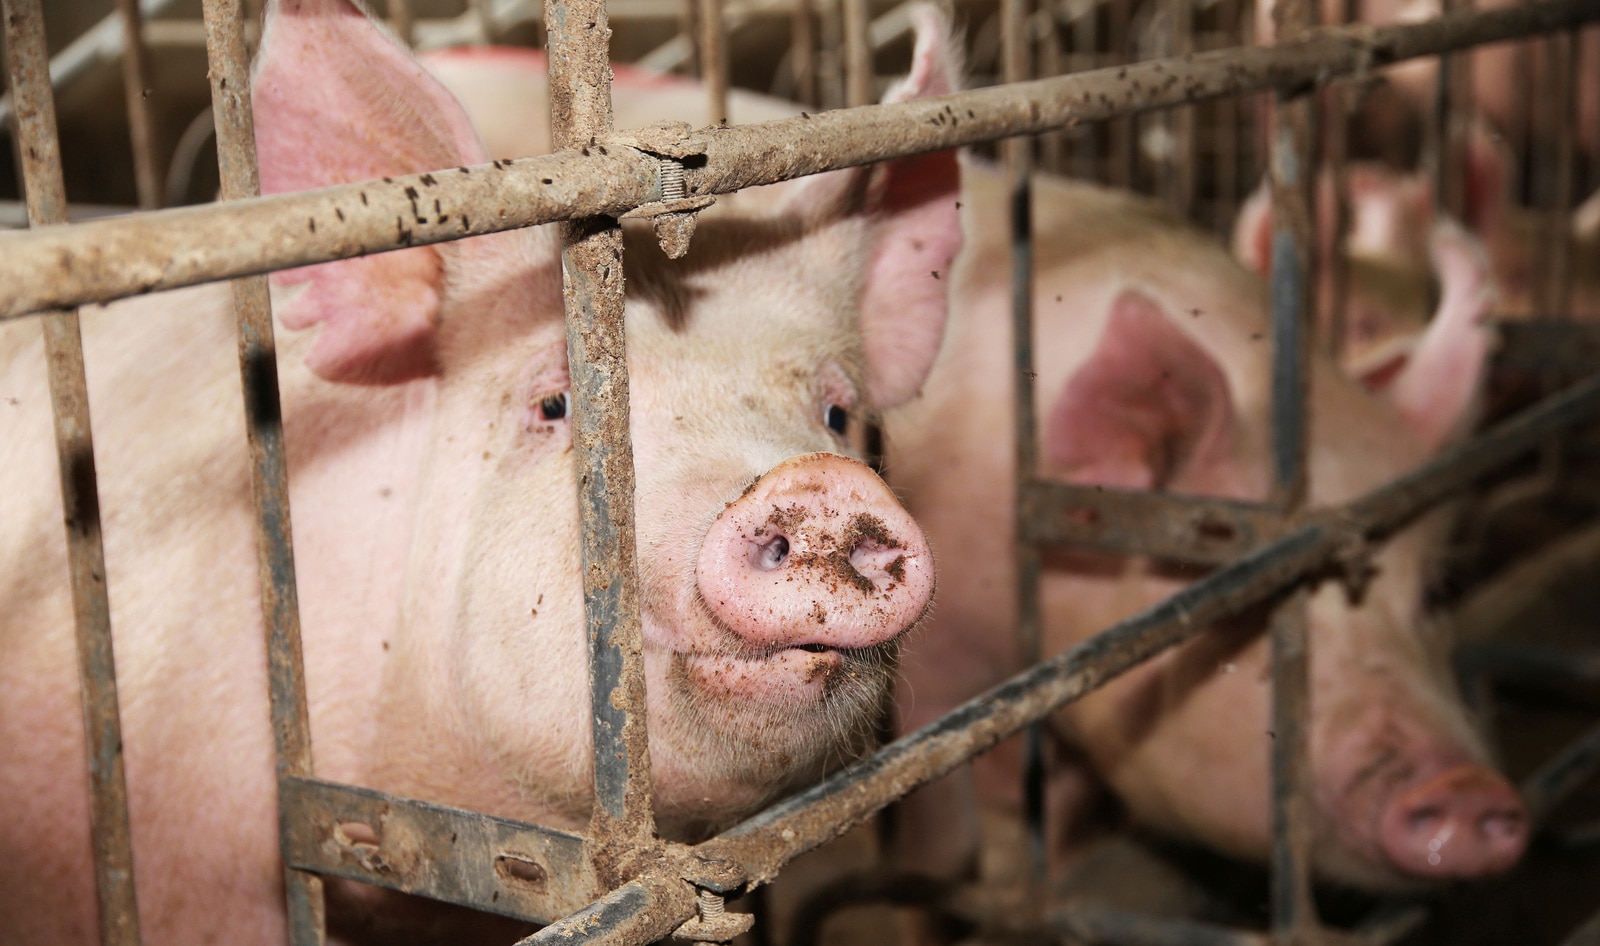 New Scientific Paper Pushes to Shut Down All Factory Farms to Stop the Spread of Diseases Like COVID-19